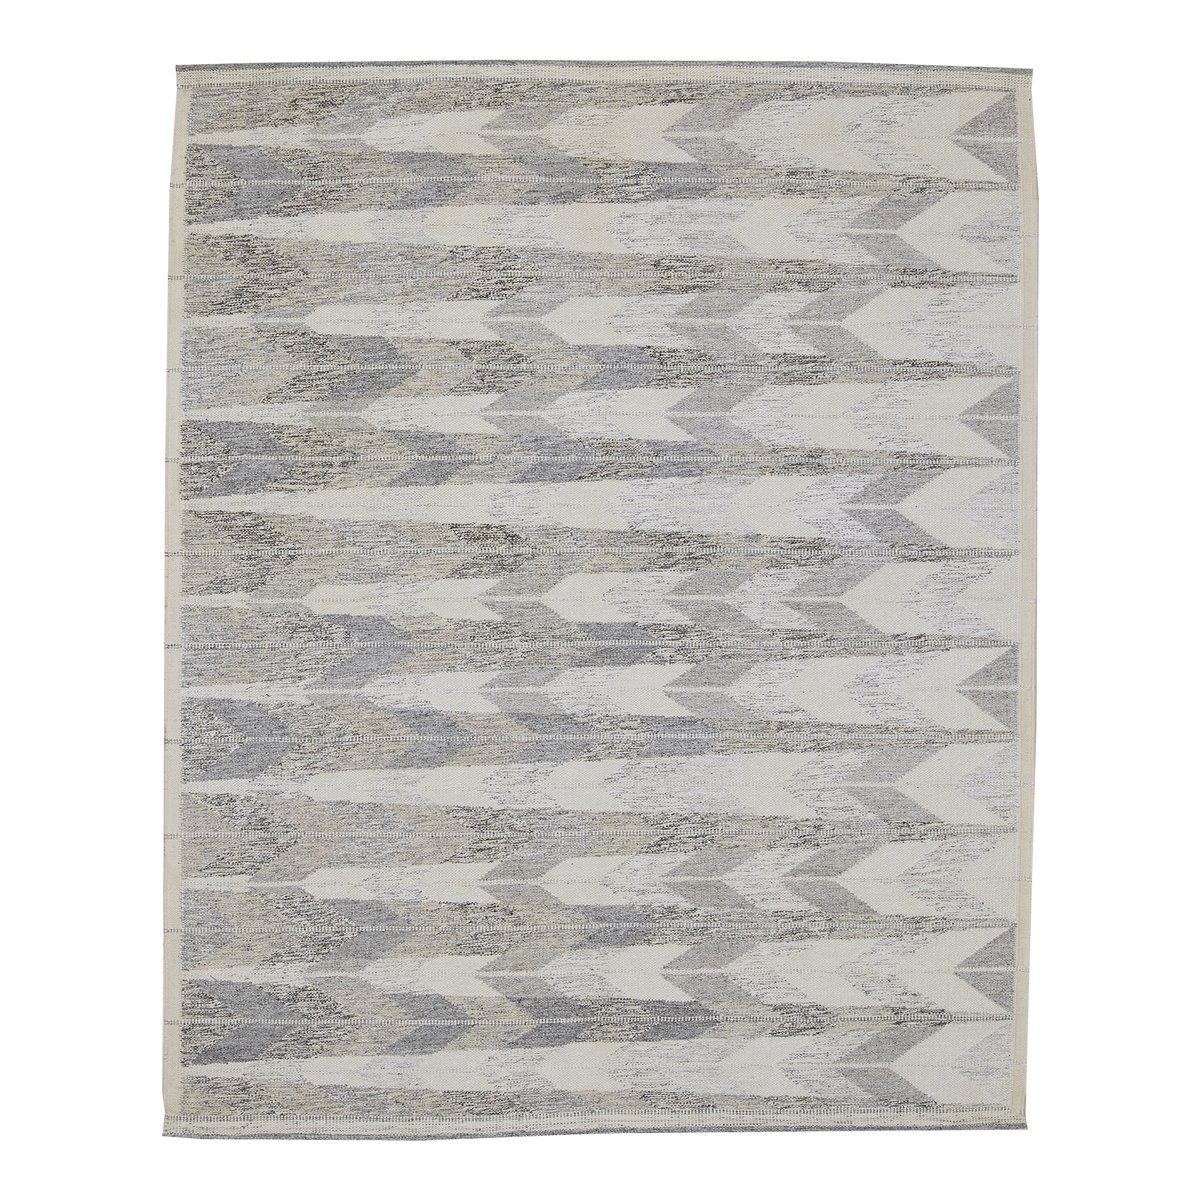 An homage to Scandinavia's long history of rug craftmanship, the Scandinavian Flatweave Collection draws inspiration from mid-century Swedish textiles, uniting traditional techniqu